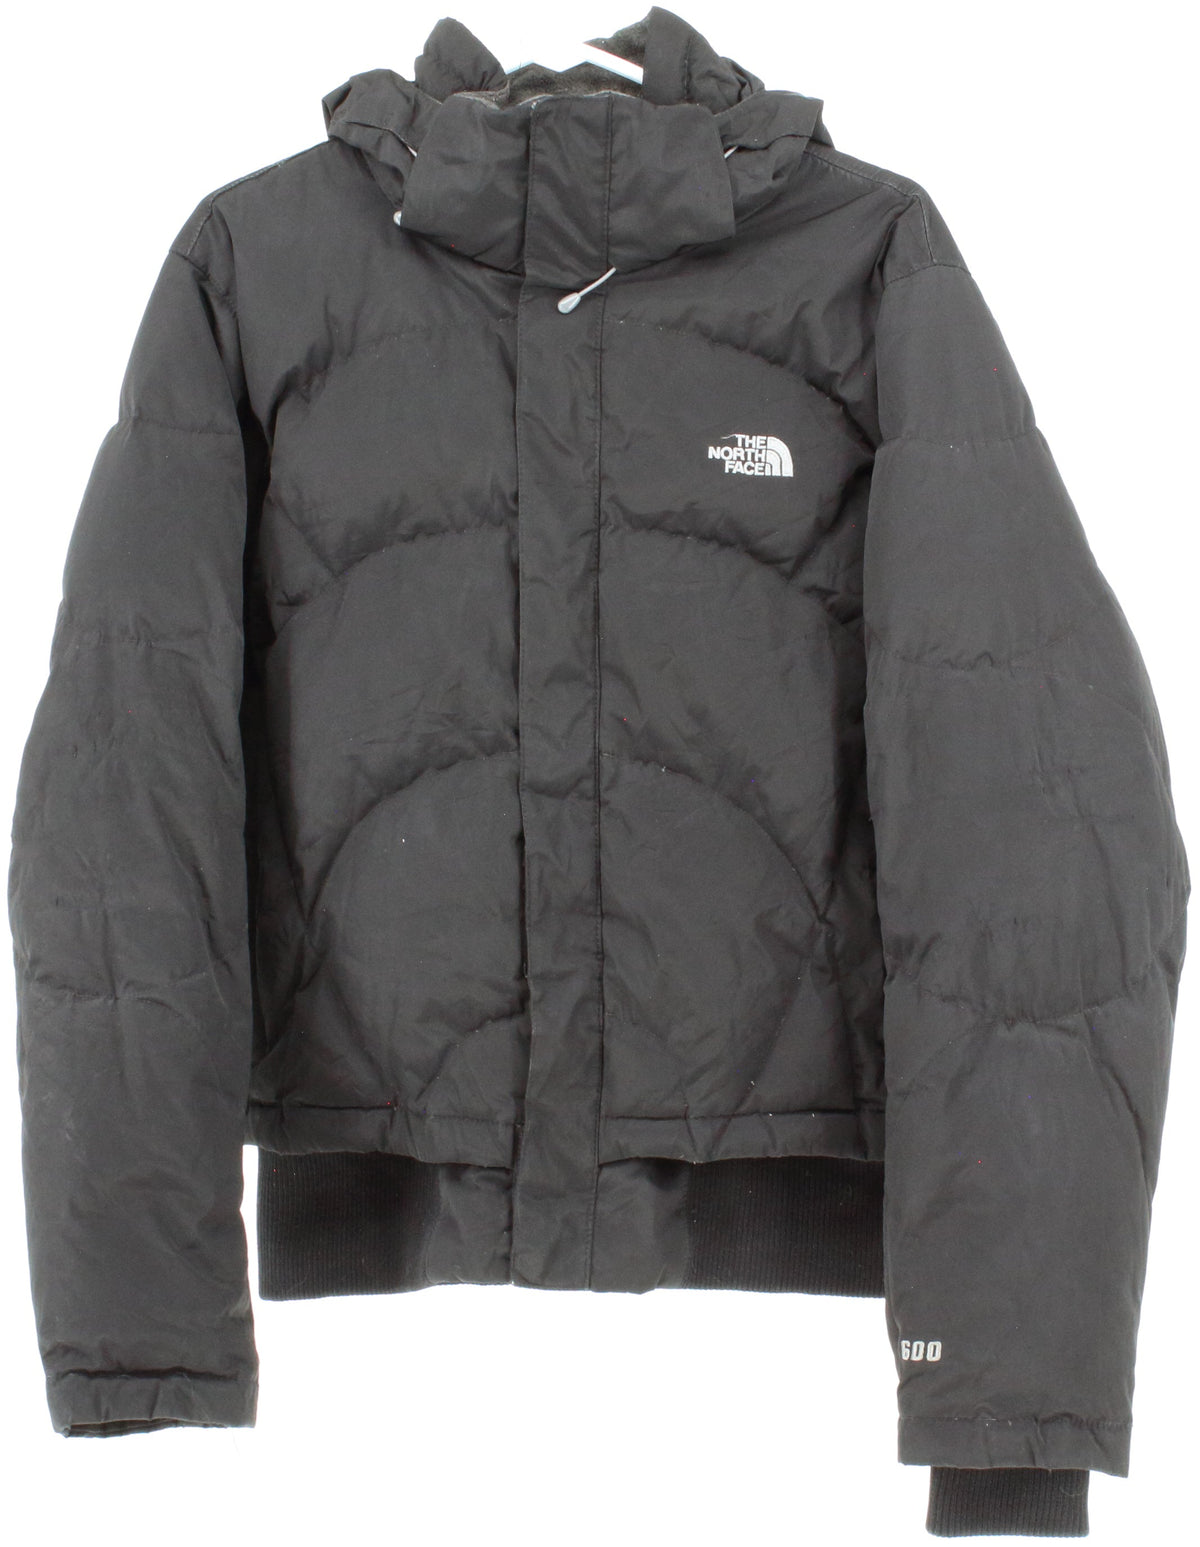 The North Face 600 Prodigy Black Hooded Women's Bomber Puffer Jacket